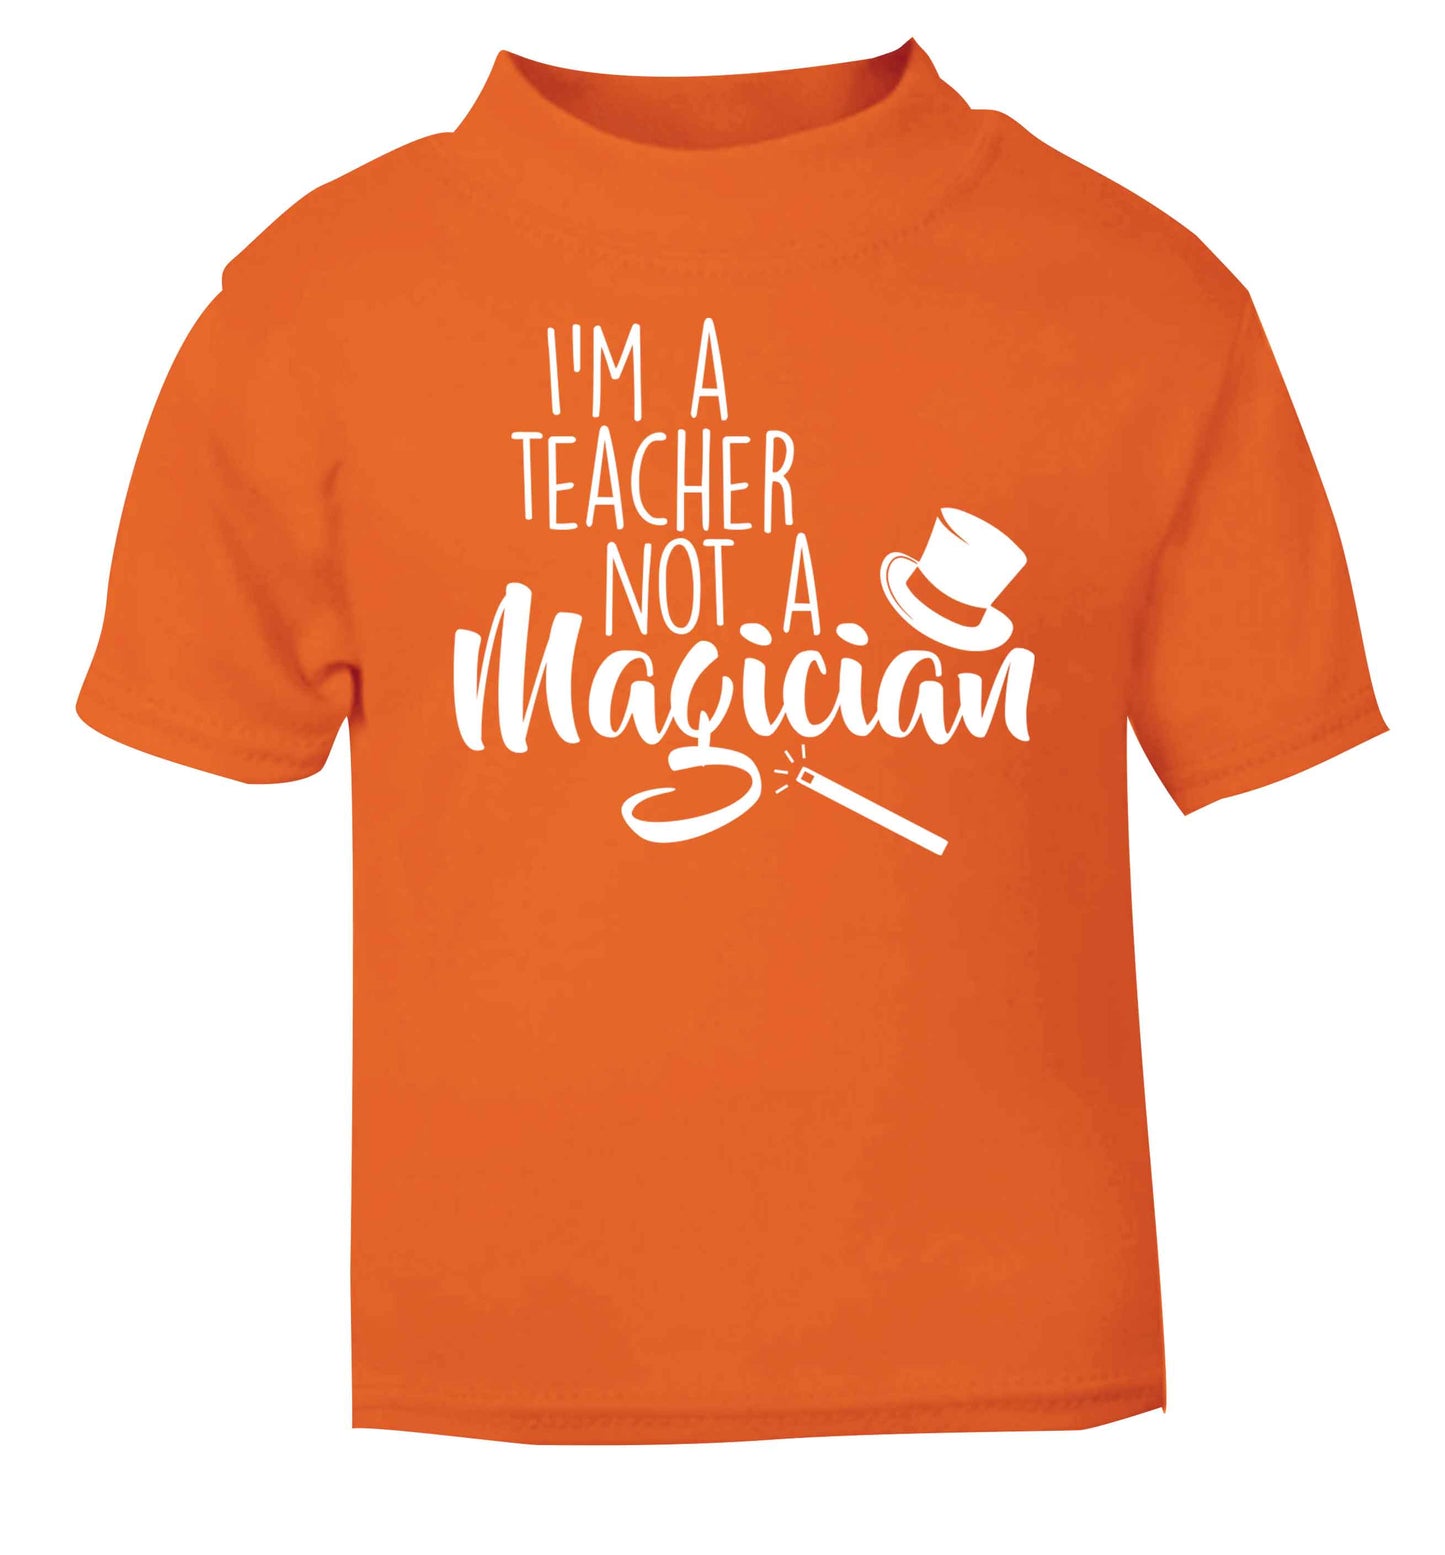 I'm a teacher not a magician orange baby toddler Tshirt 2 Years